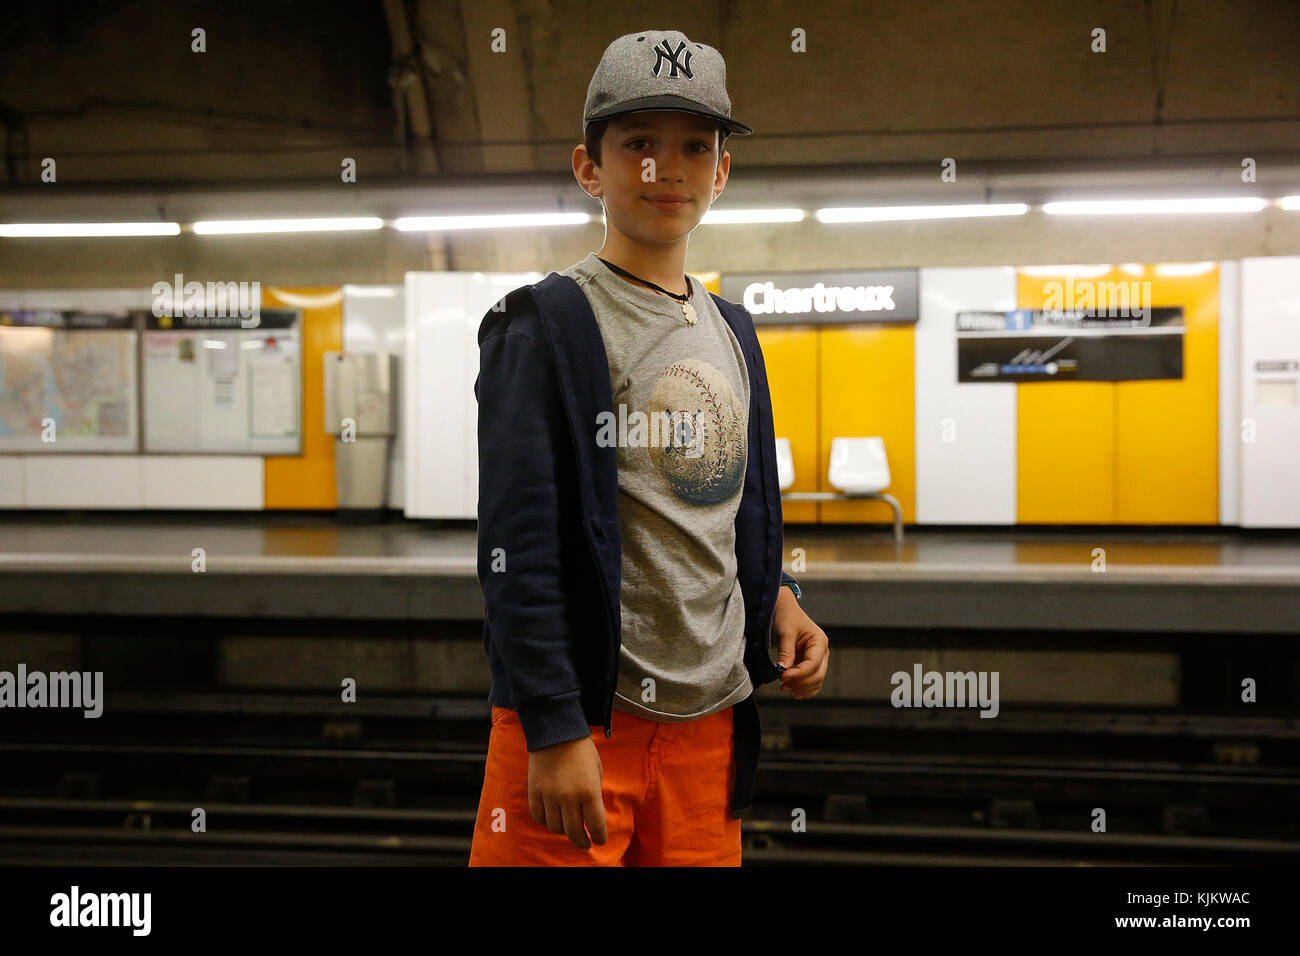 10-year-old boy in a subway station. Marseilles. France. Stock Photo